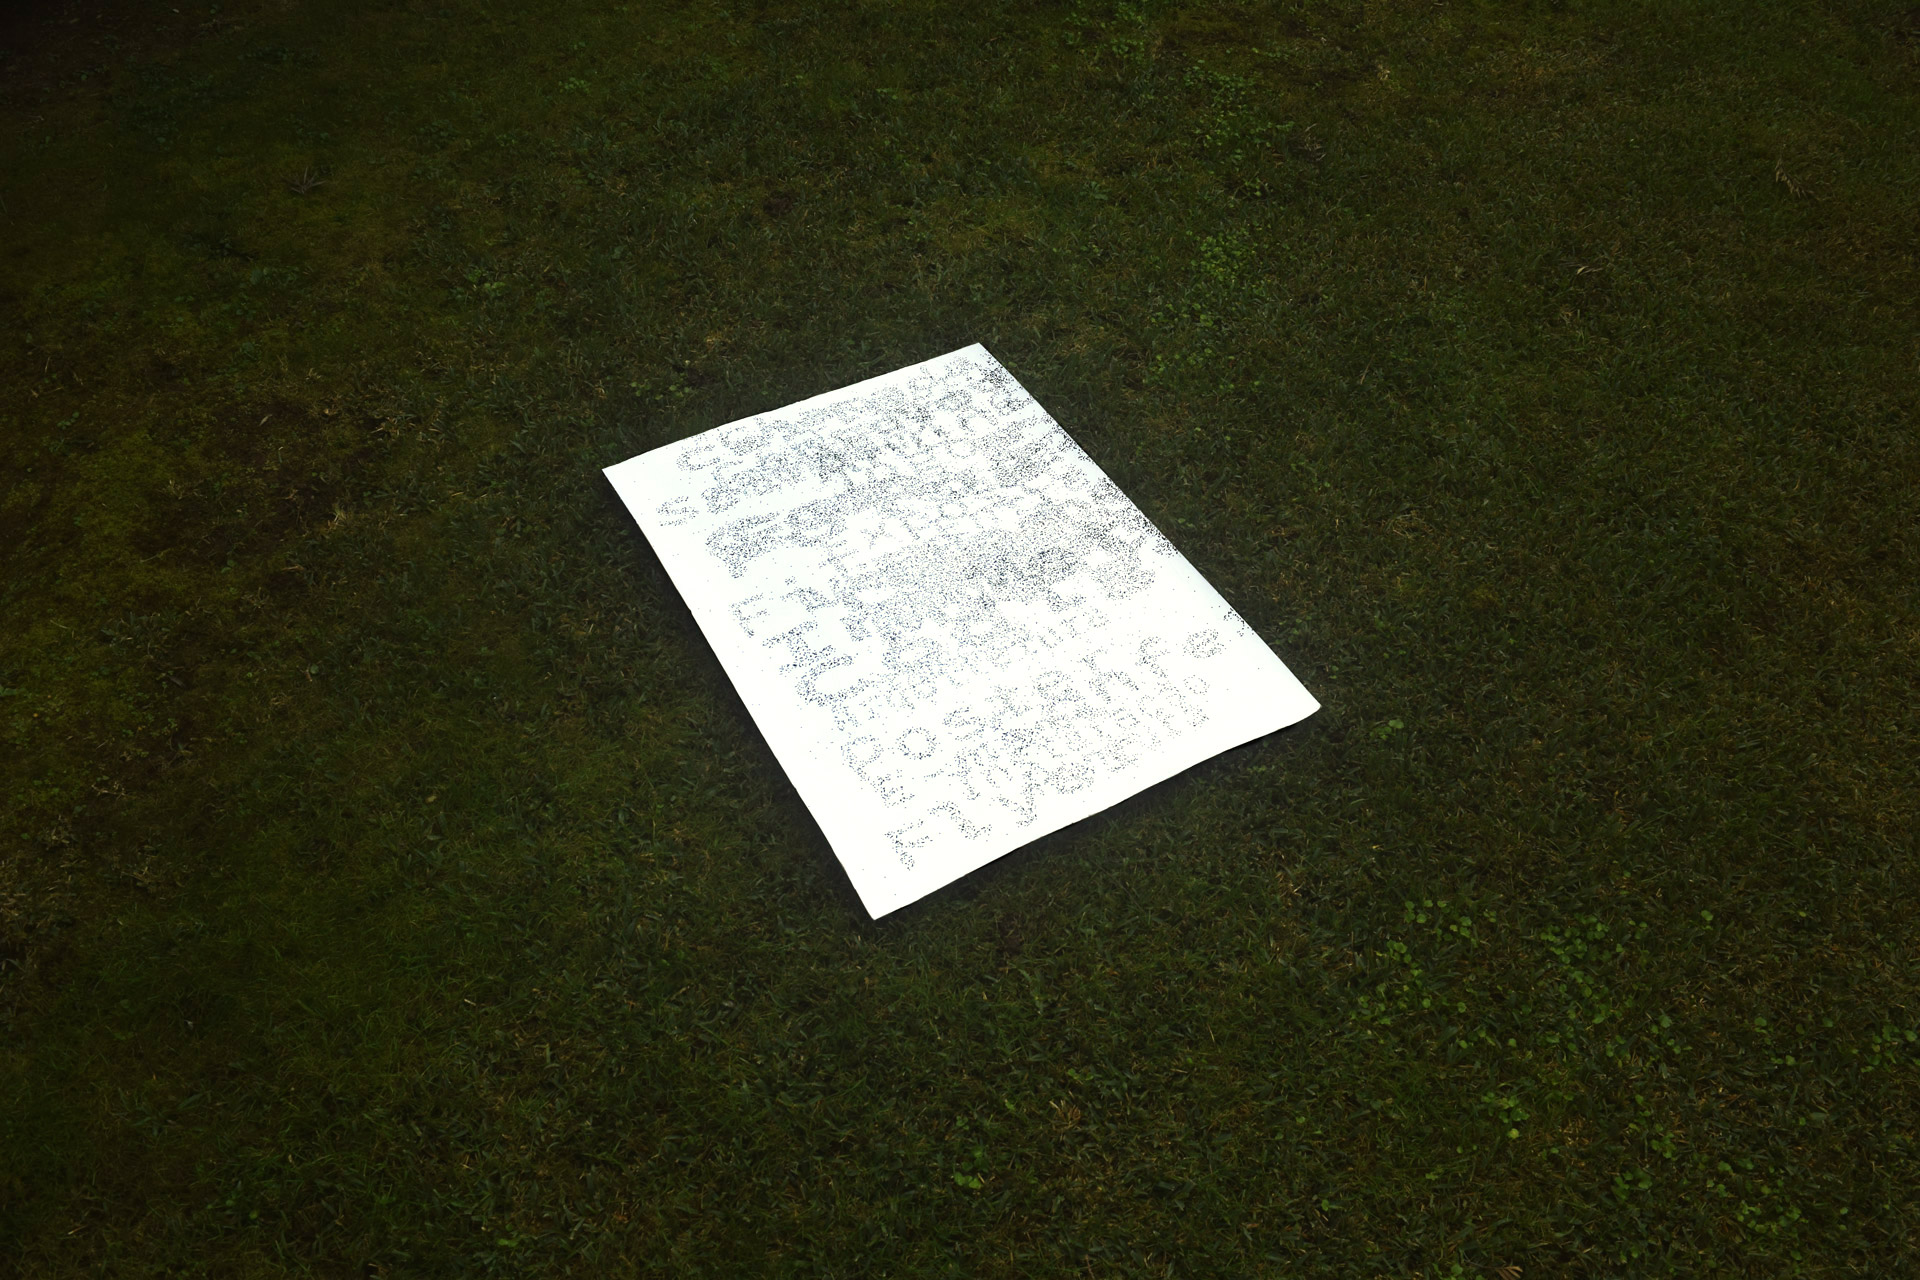 Photo of a poster laying in grass.